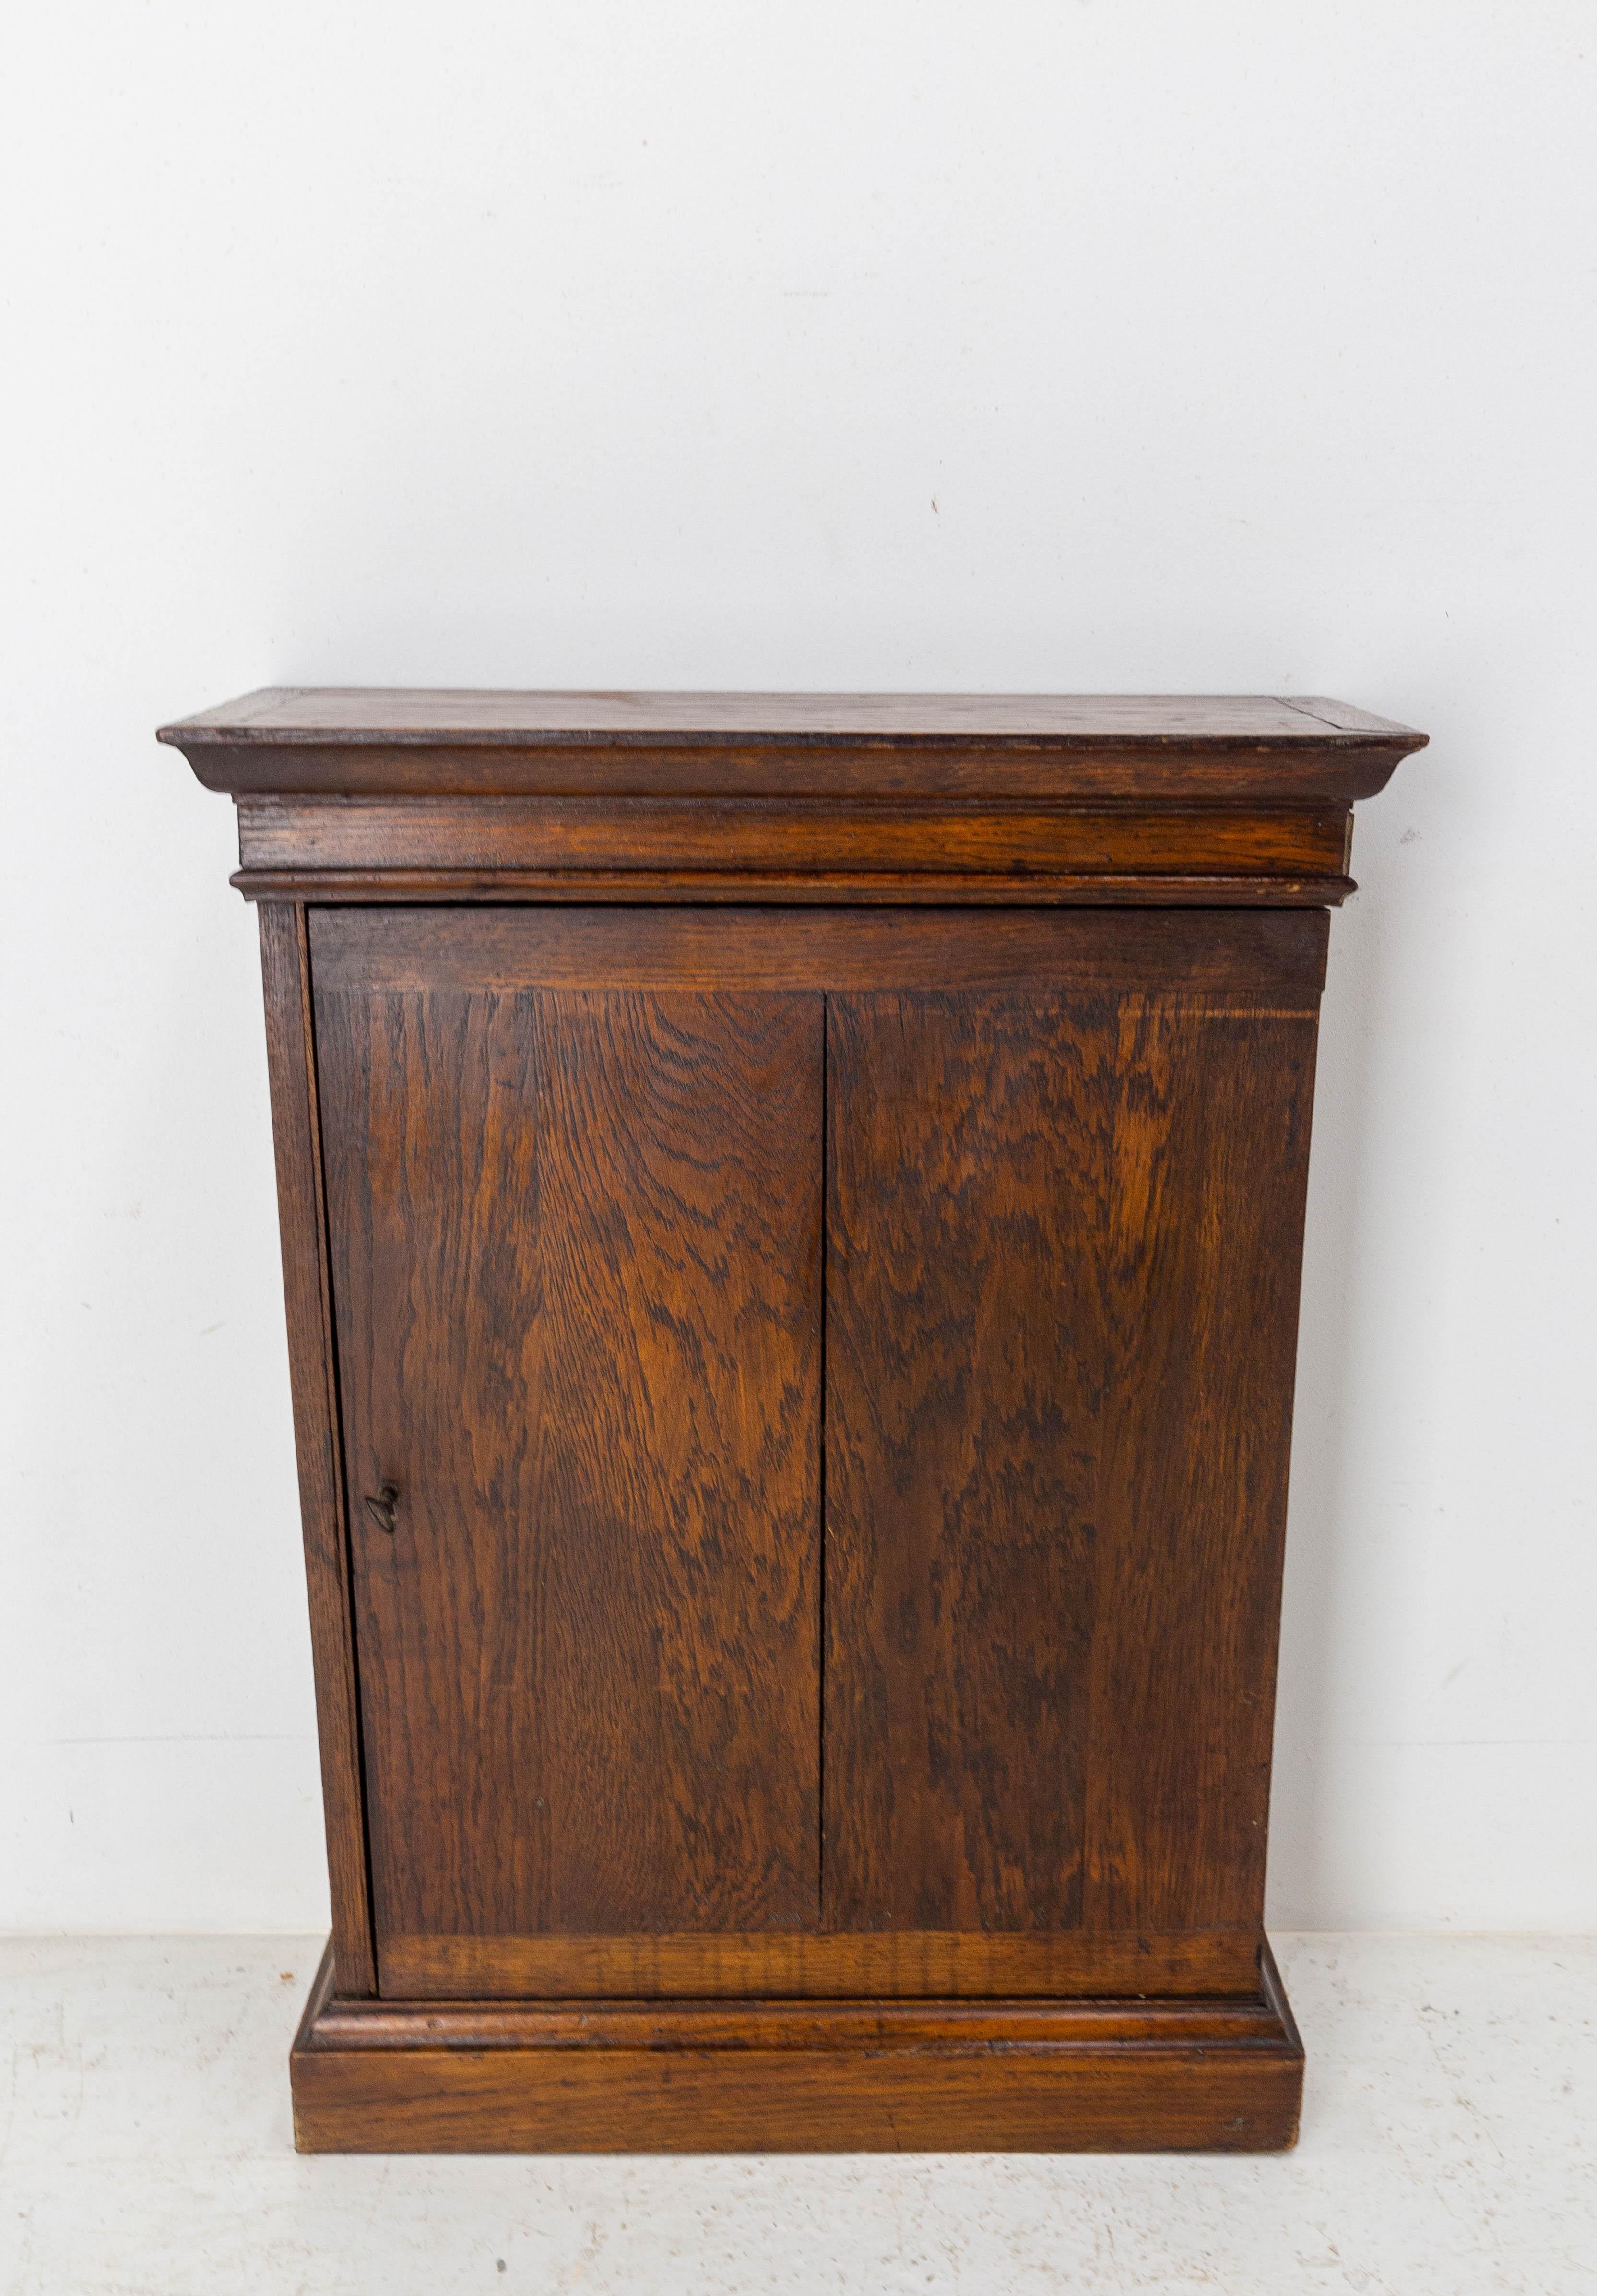 Early 20th century French cabinet buffet
Oak wood
Reduced depth furniture ideal for small spaces
One median shelf
In good condition 

Shipping:
L53,5 P19,5 H72 11,5 kg